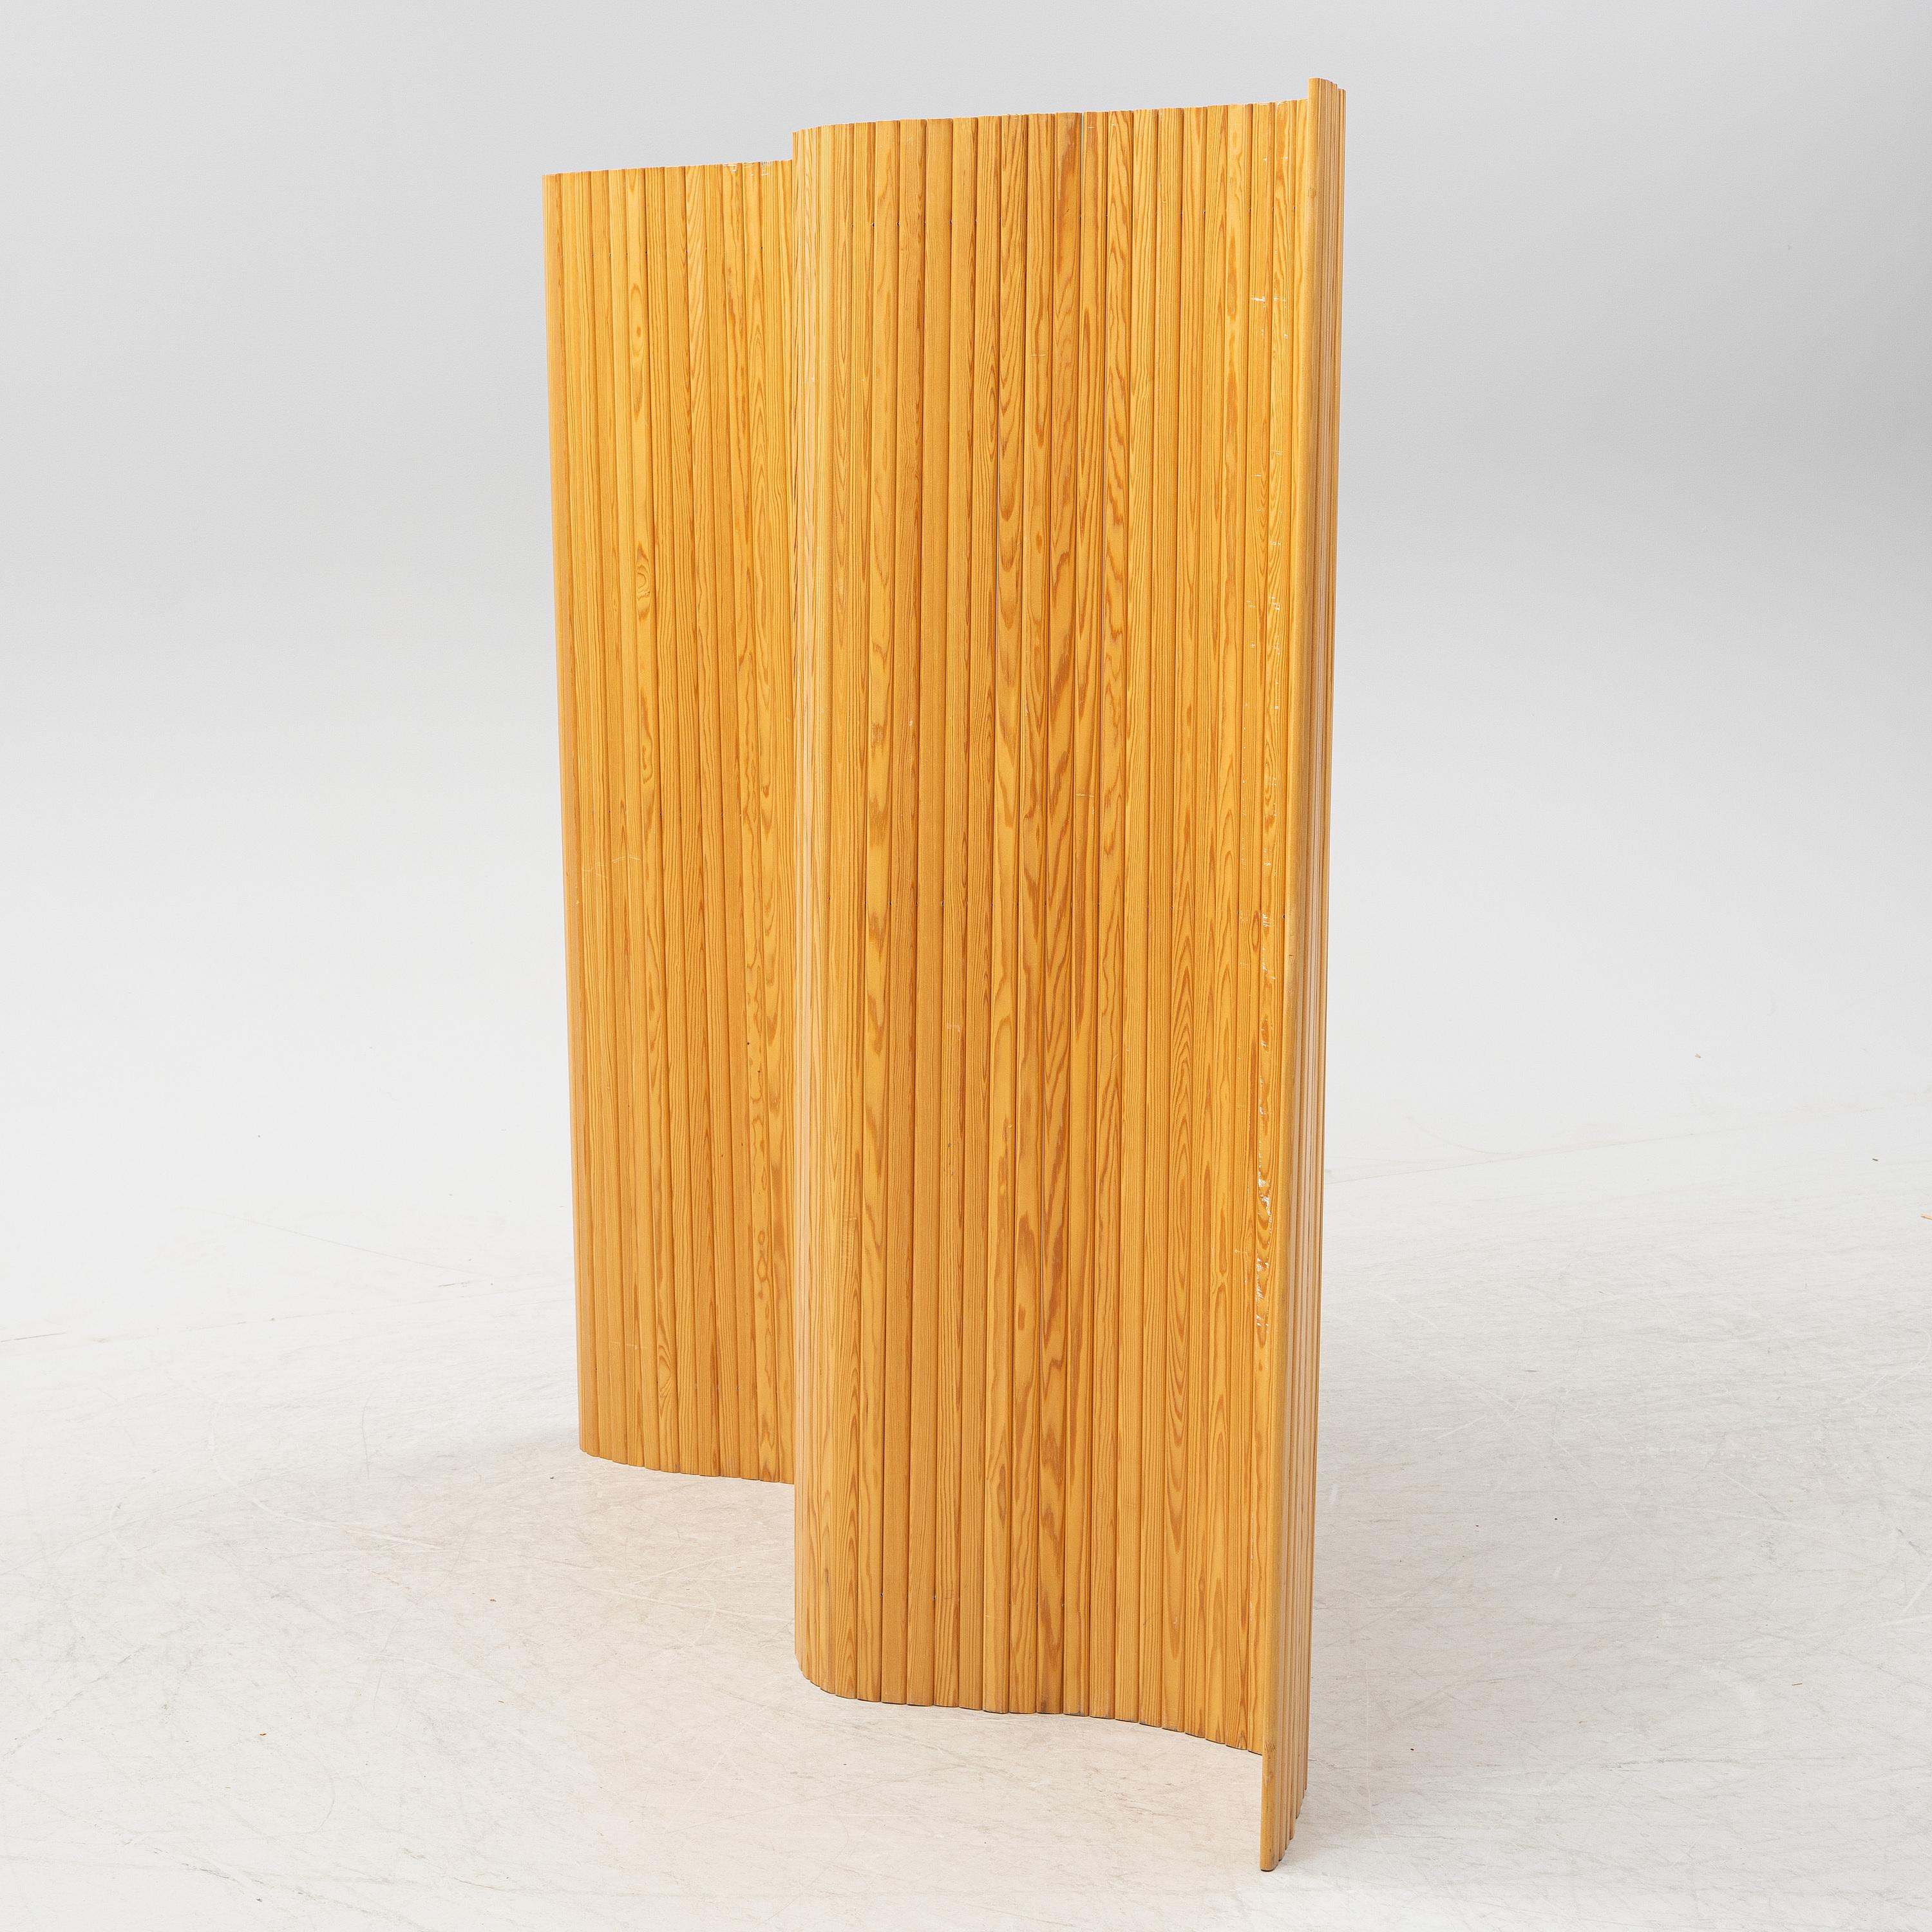 The Artek 100 Screen is a panel wood room divider with a natural design from Alvar Aalto, which will blend into any type of interior. The Artek 100 screen is suitable for occasional use or for permanently sectioning off part of a room. Ideal for